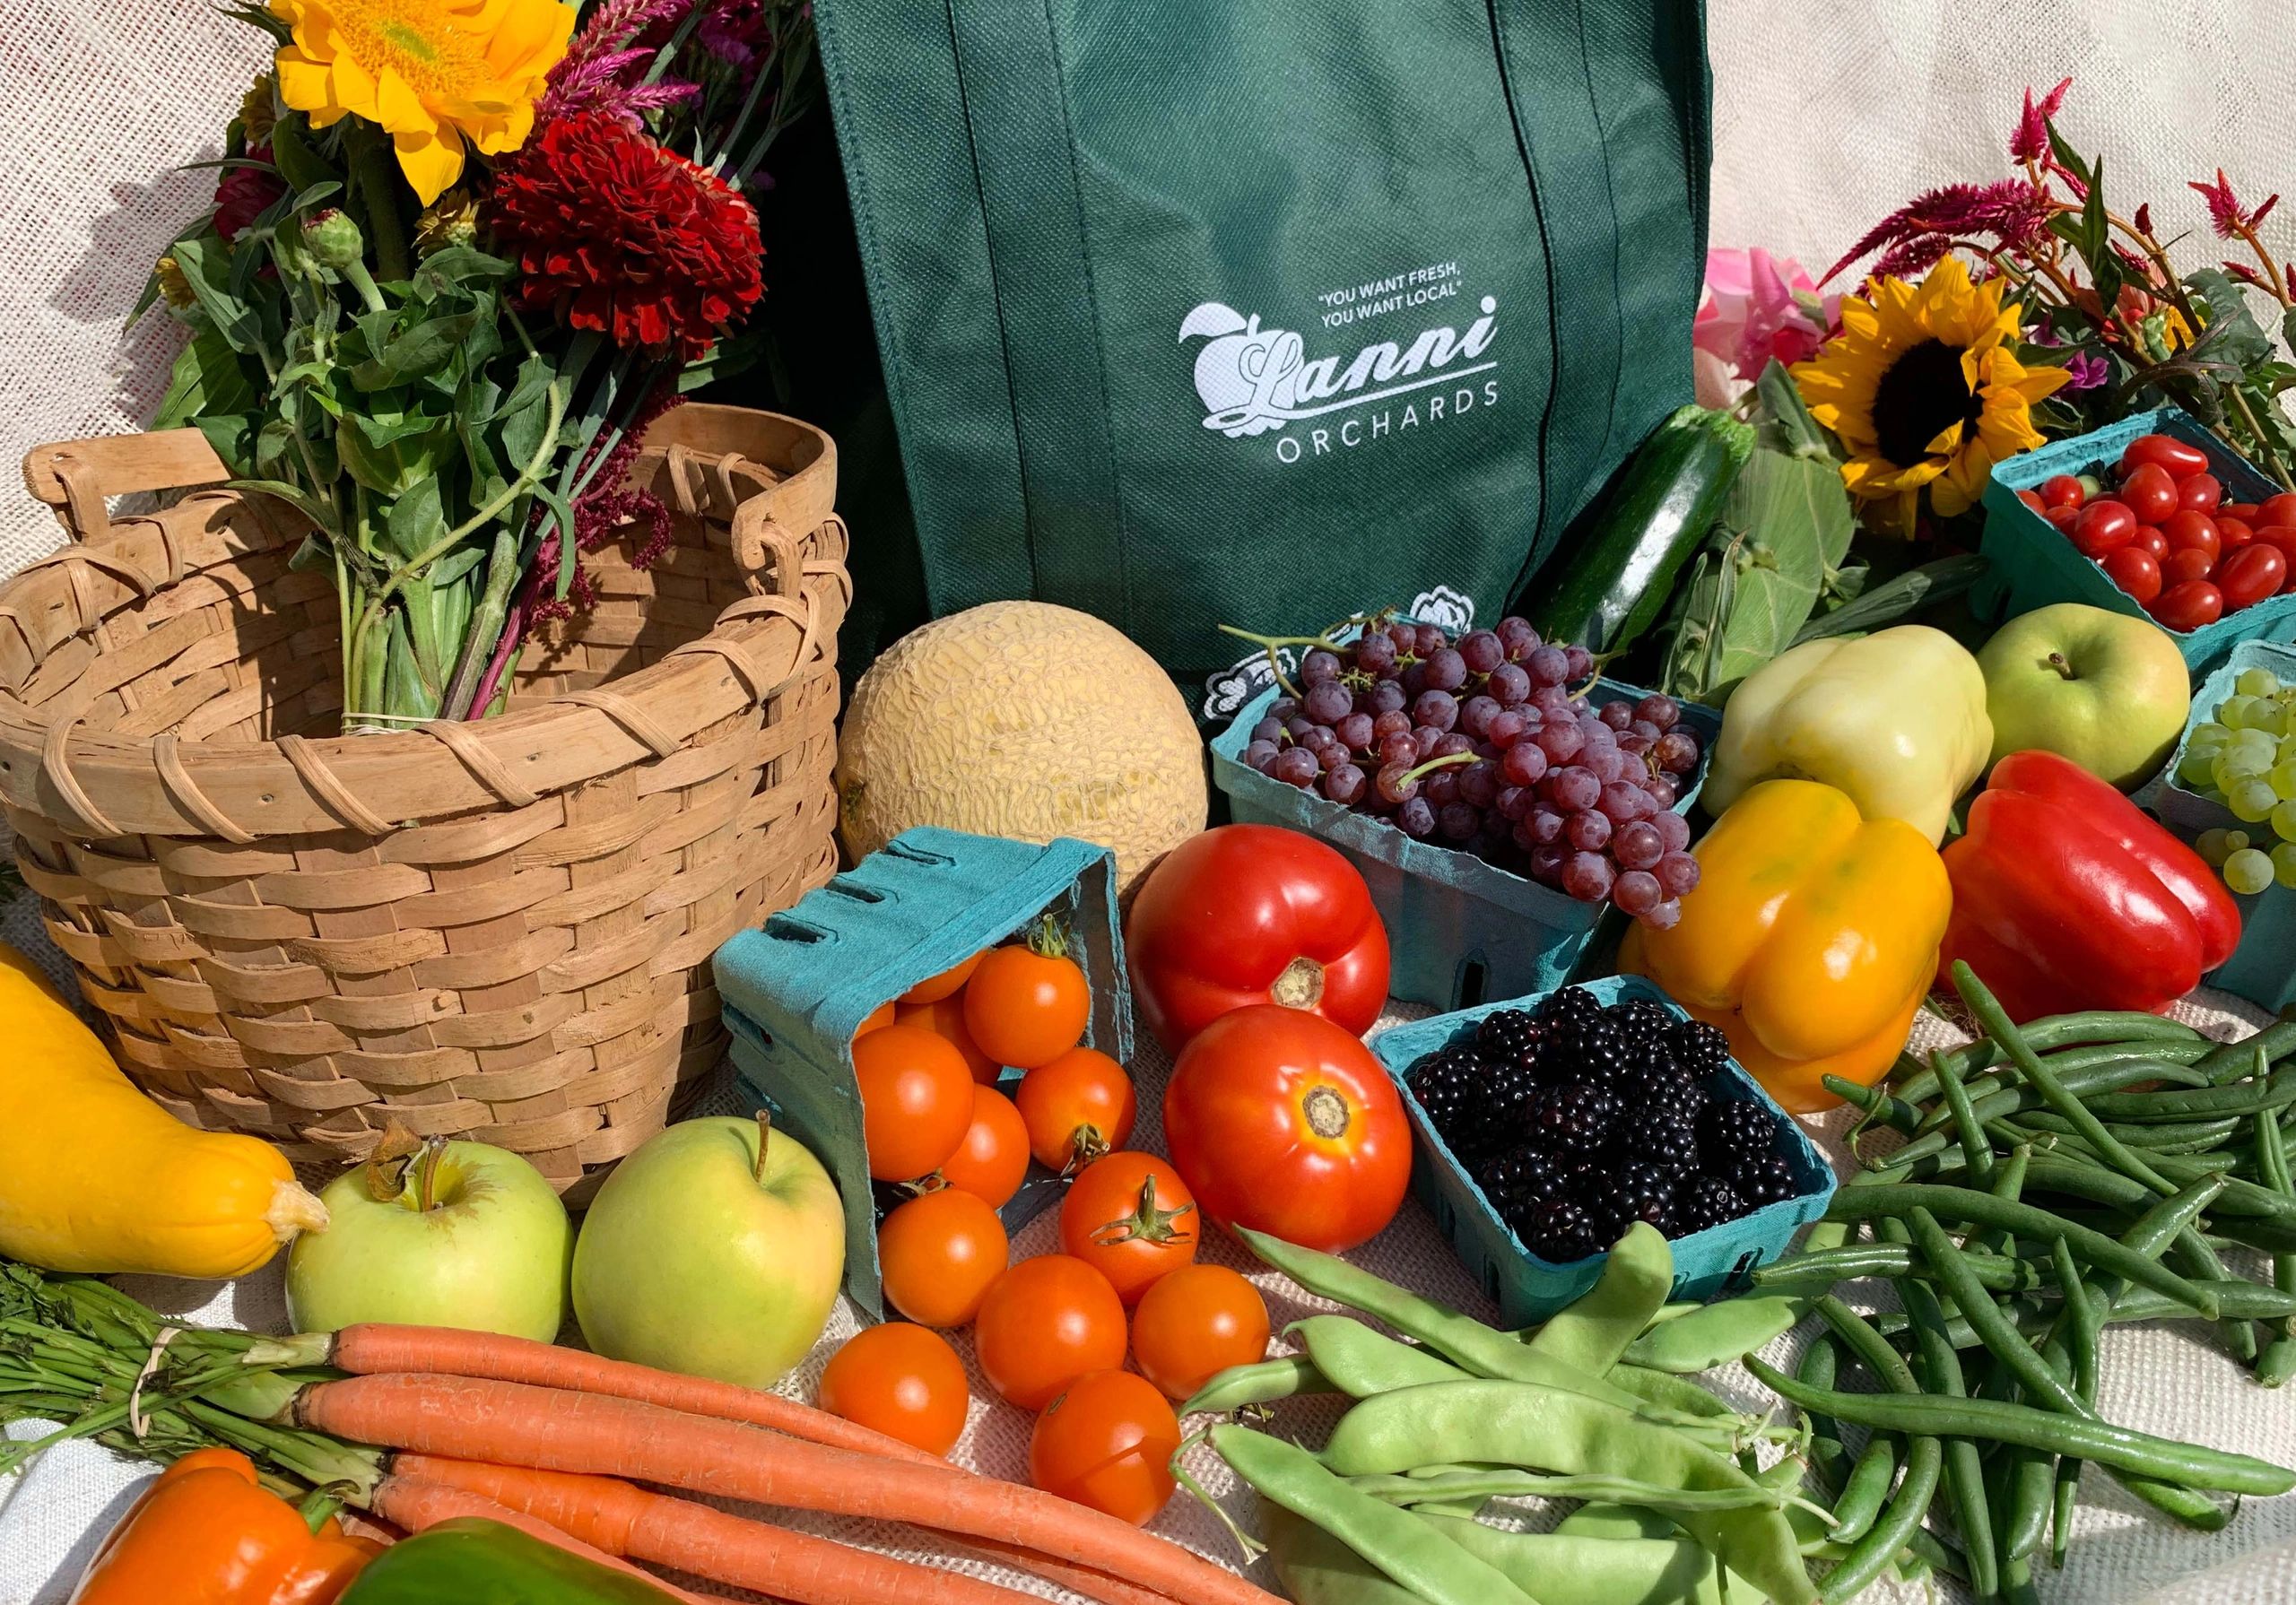 fruits and veggies that we grow & offer as a farm share. CSA farm shares are weekly bags of produce.